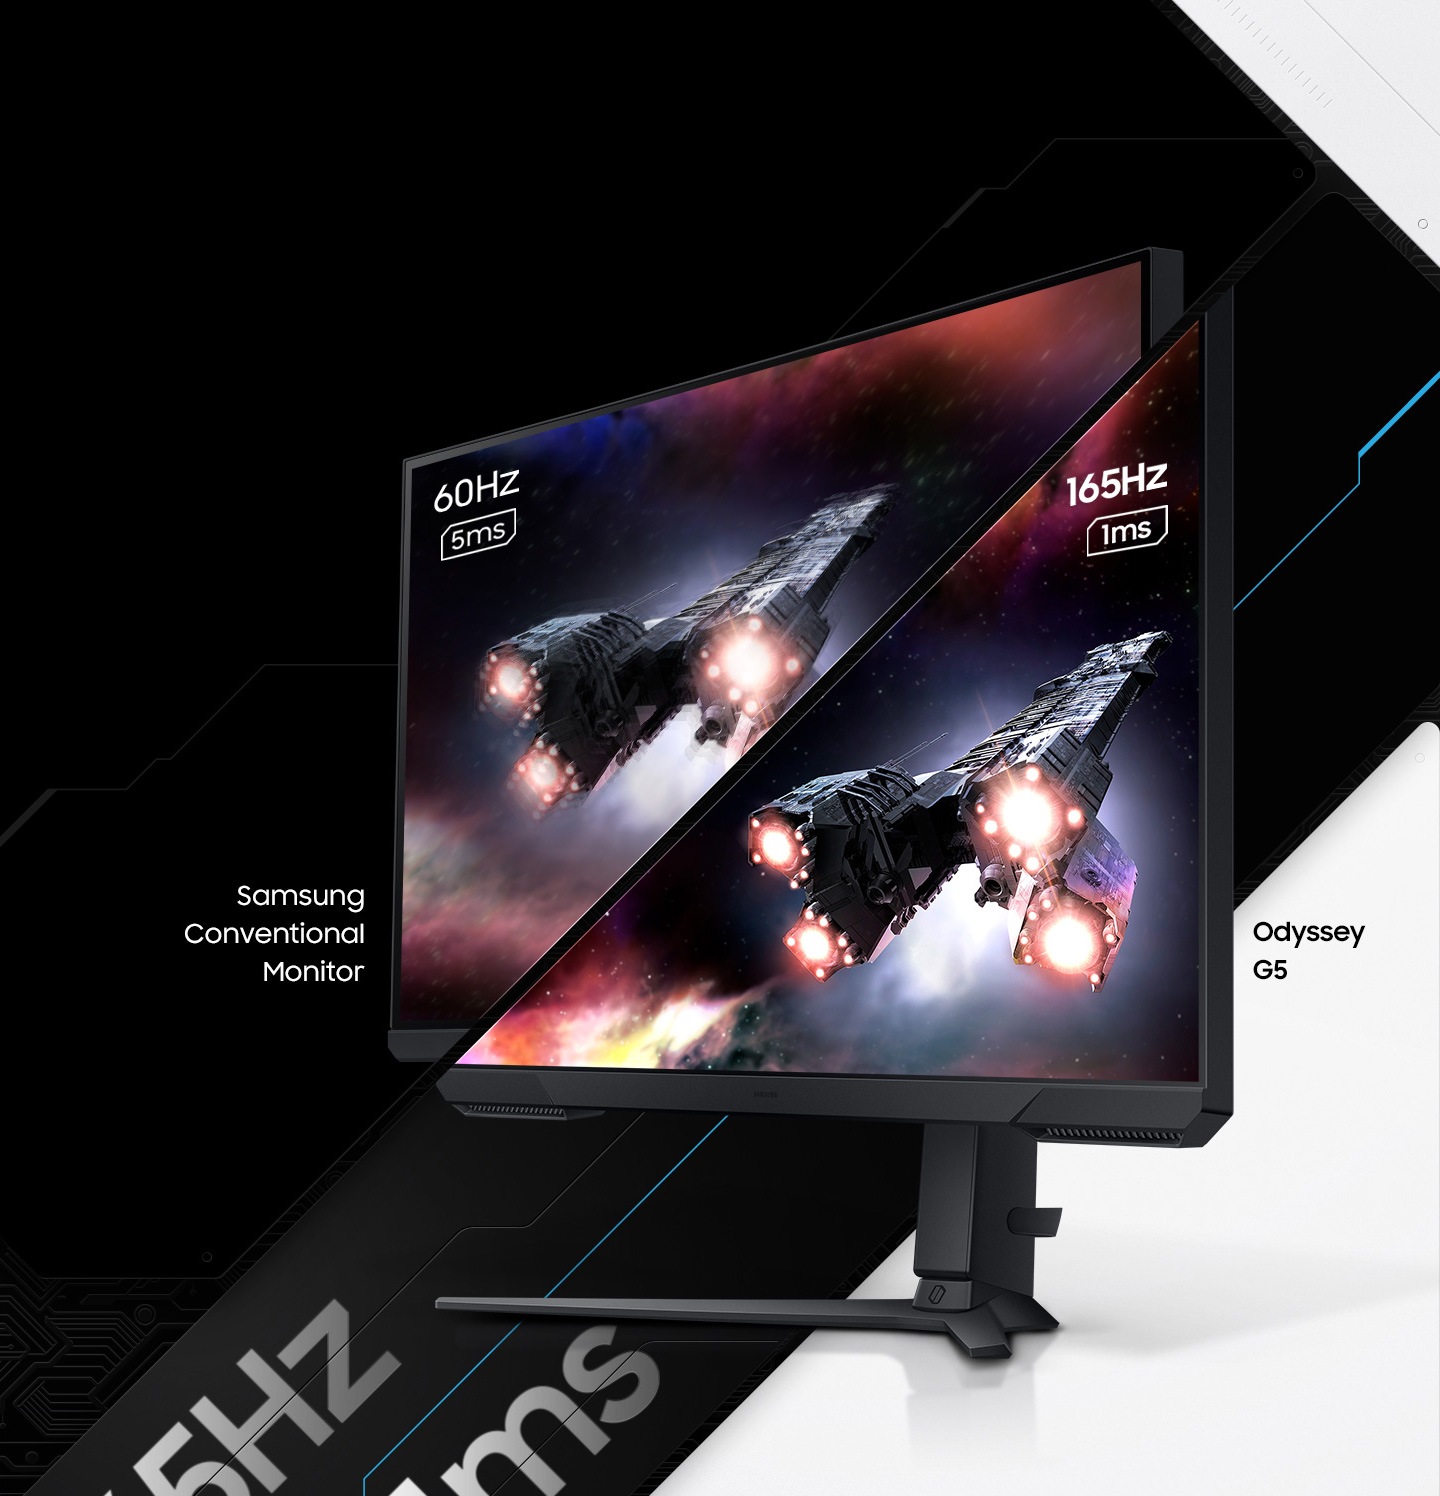 A monitor which is seen from its right side shows two spaceships blasting off into space. The monitor is split in two to show the difference in display quality comparing two different refresh rates and response time, one for Samsung conventional monitor with 60Hz and 5ms and the other for Odyssey G5 with 165Hz and 1ms.